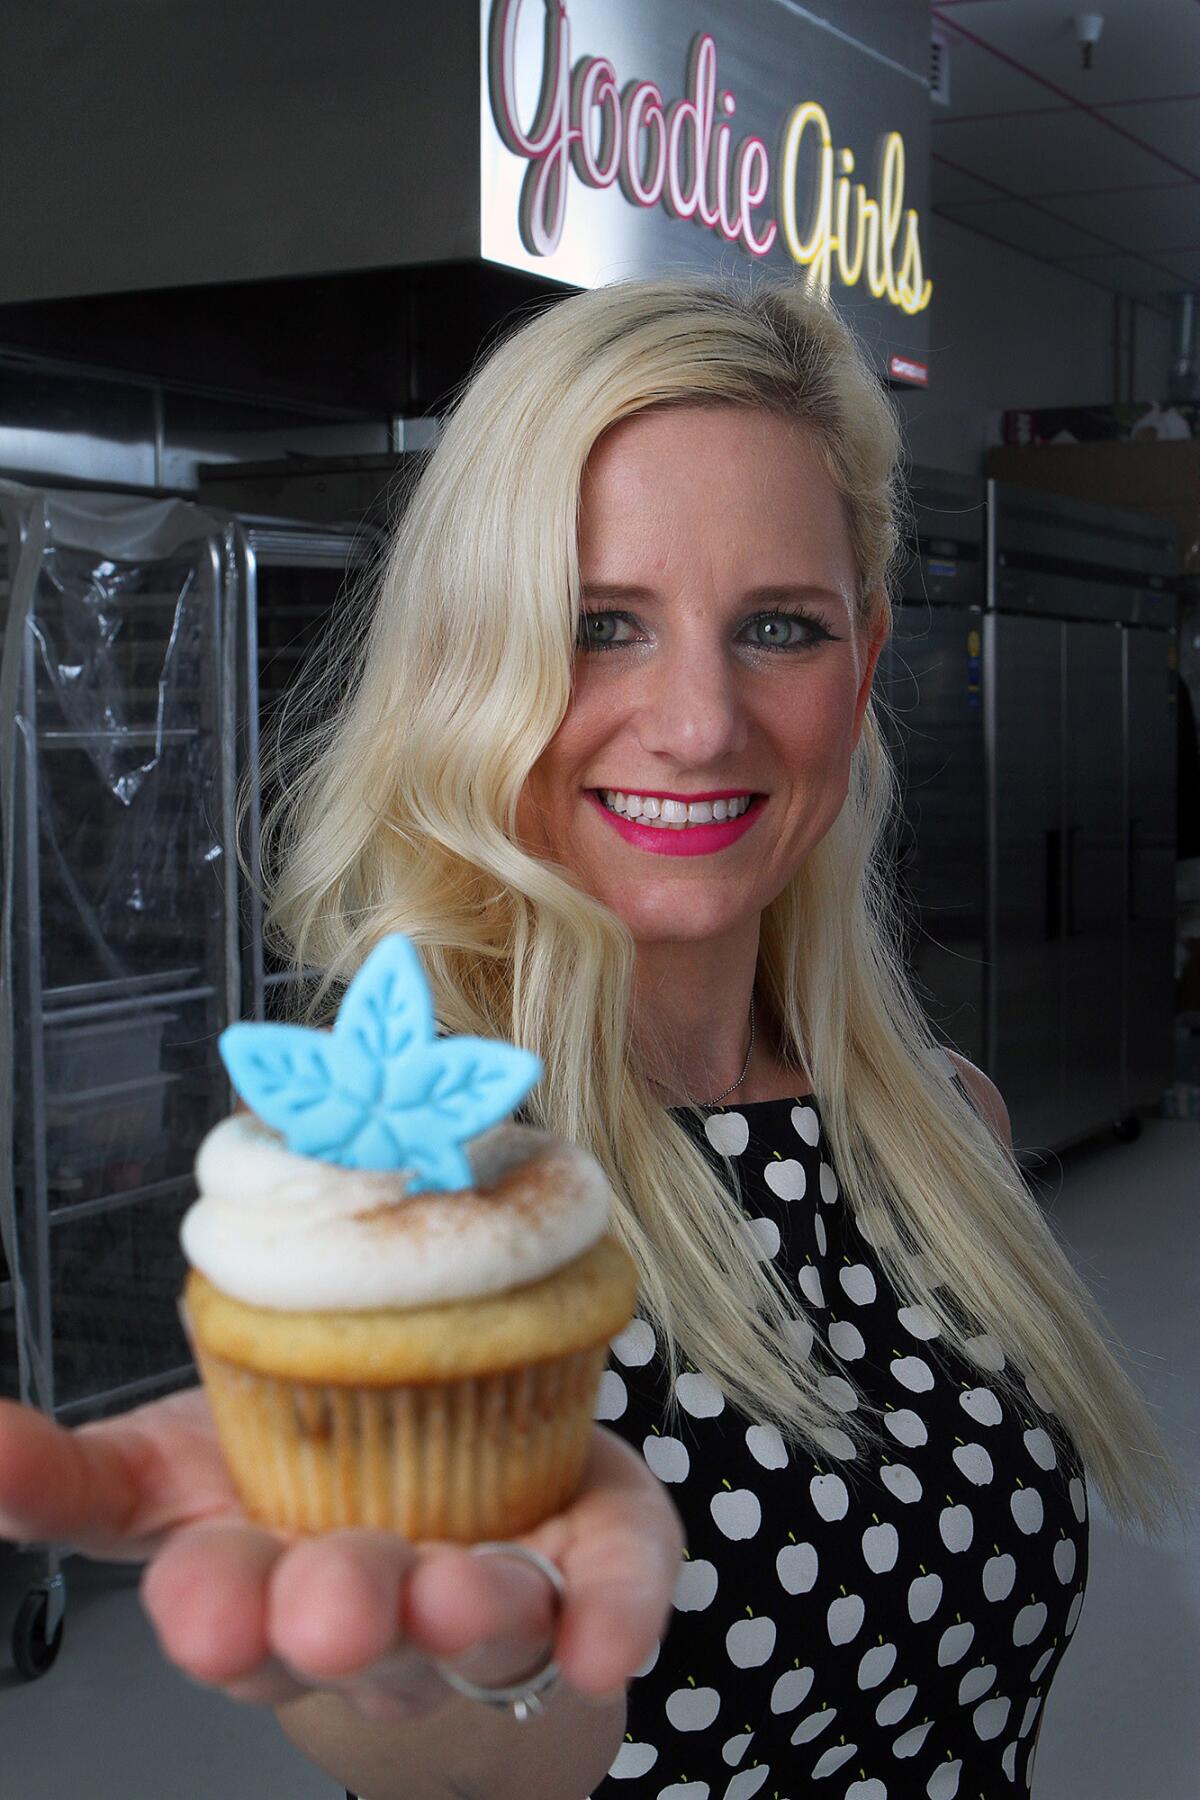 Chef-Owner Annette Starbuck, at Goodie Girls Cupcakes, holds a cinnamon roll cupcake in La Cañada Flintridge on Thursday, Dec. 12, 2013.